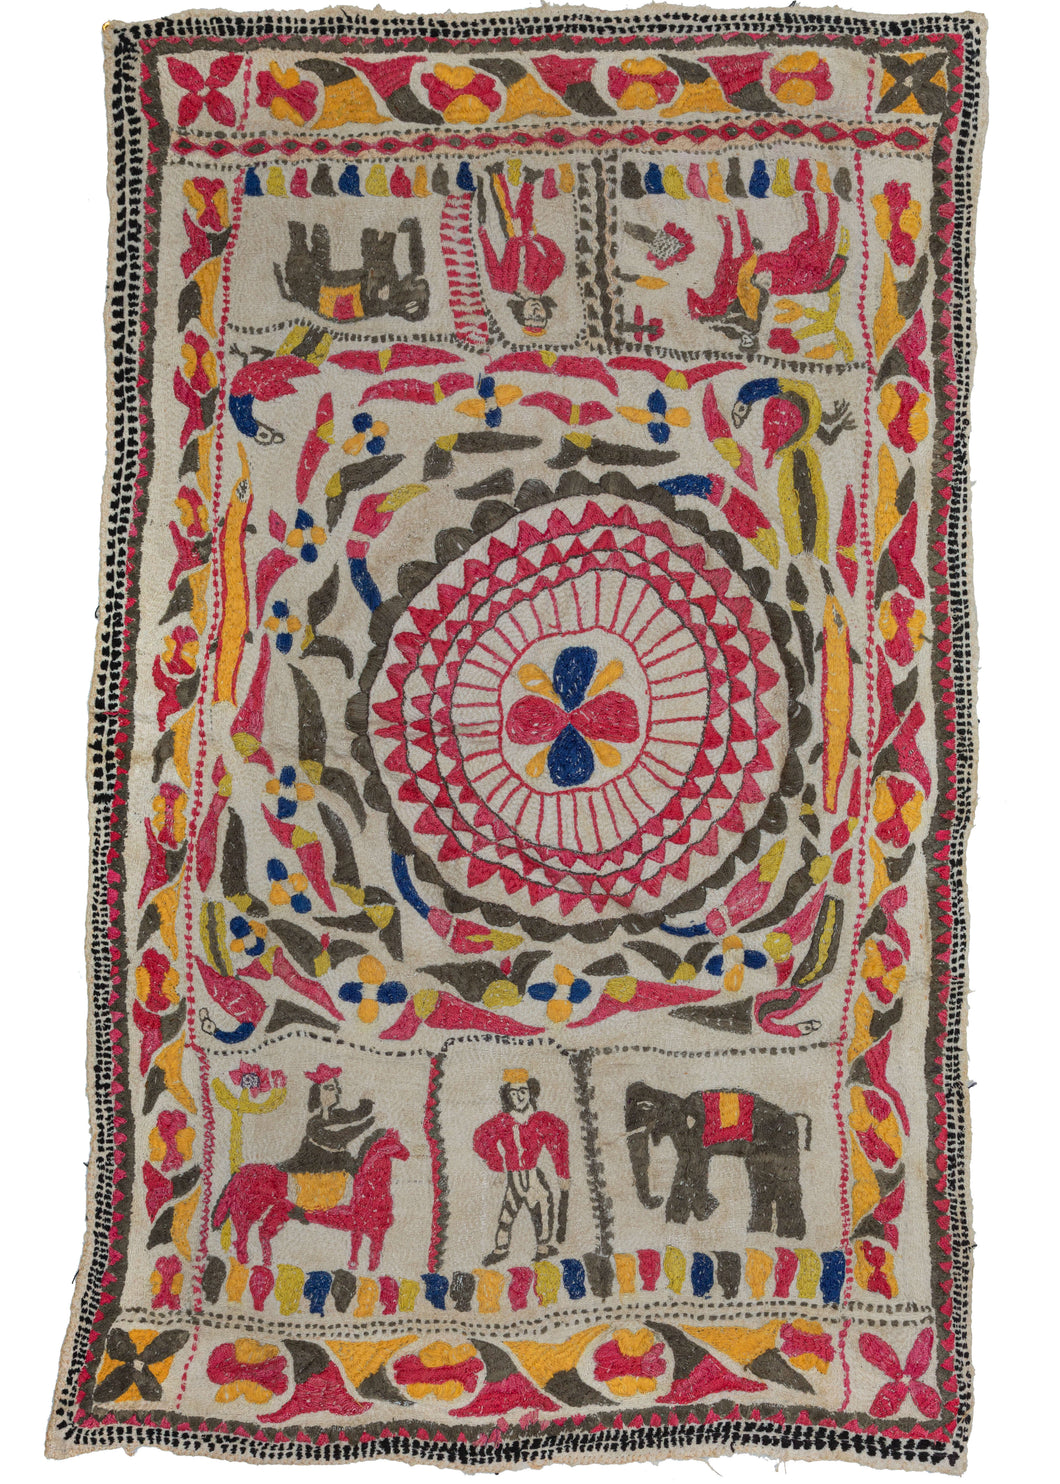 Antique Nakshi Kantha featuring an off-center mandala with three reciprocal panels on top and bottom. The panels feature an elephant, a person on horseback, and what appears to be a rendition of the British hunter motif. It is framed by an alternating rosette and leaf border reminiscent of the classical egg and dart style. At the four corners of the border is a single rosette.